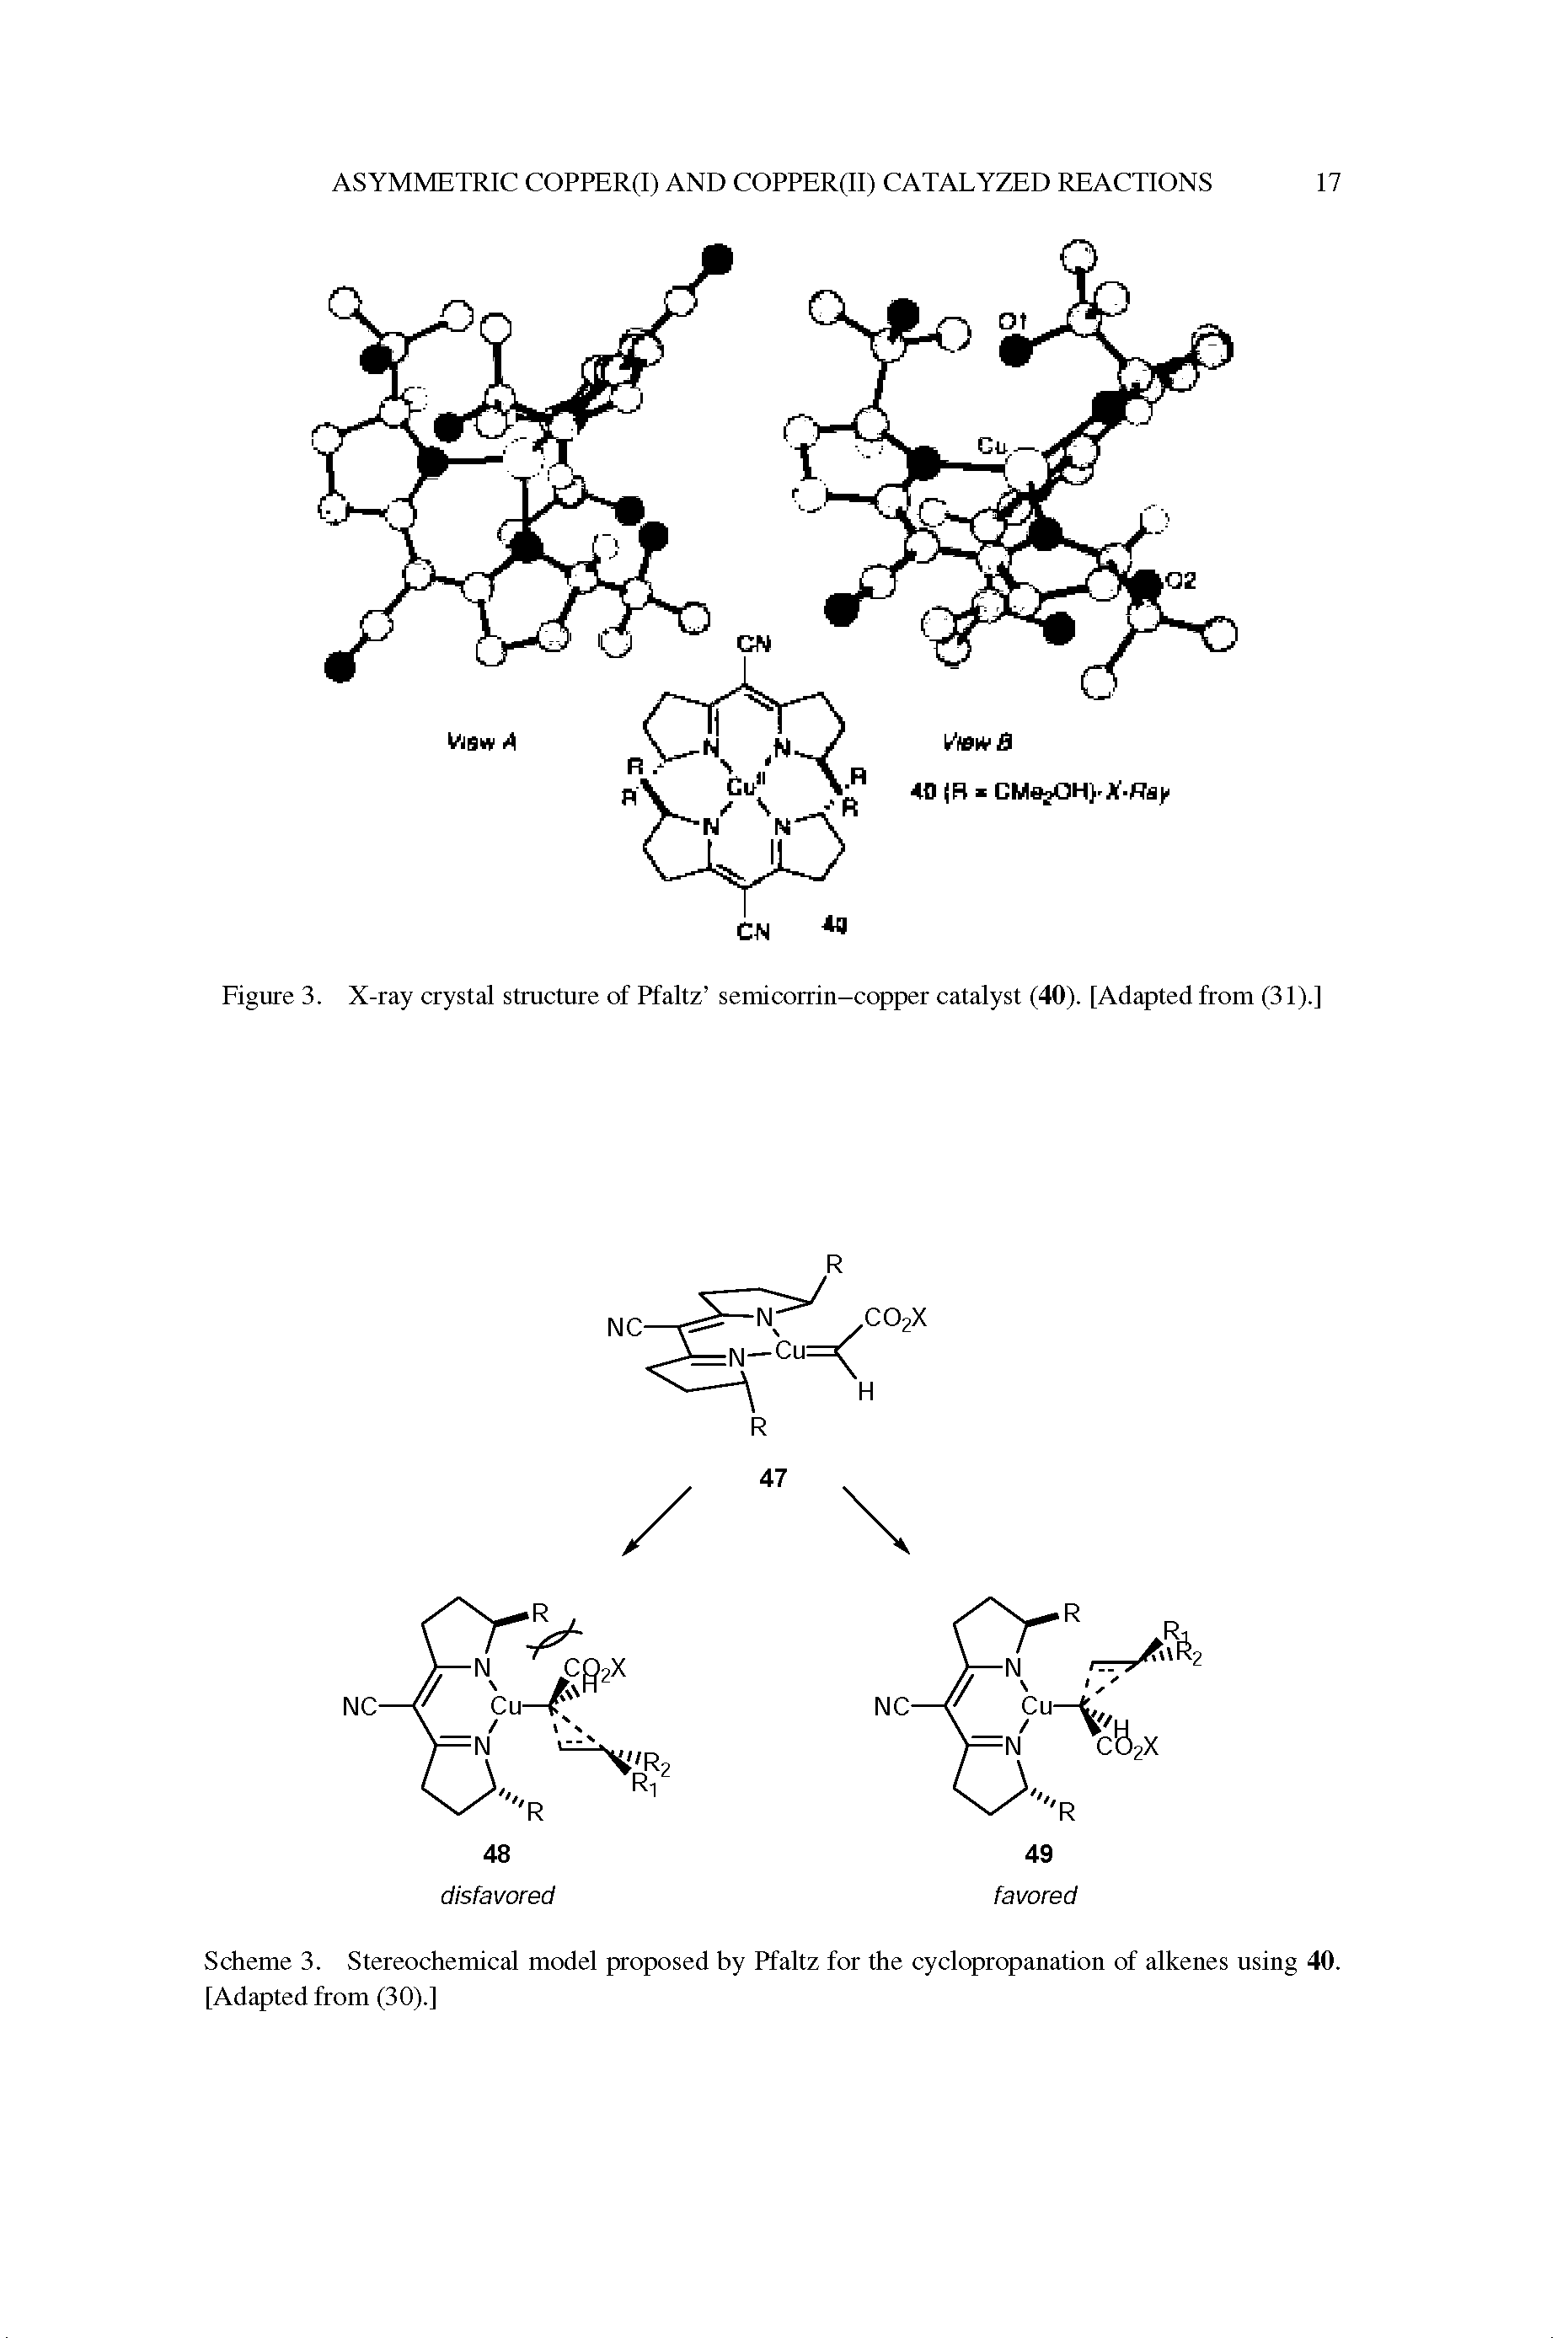 Figure 3. X-ray crystal structure of Pfaltz semicorrin-copper catalyst (40). [Adapted from (31).]...